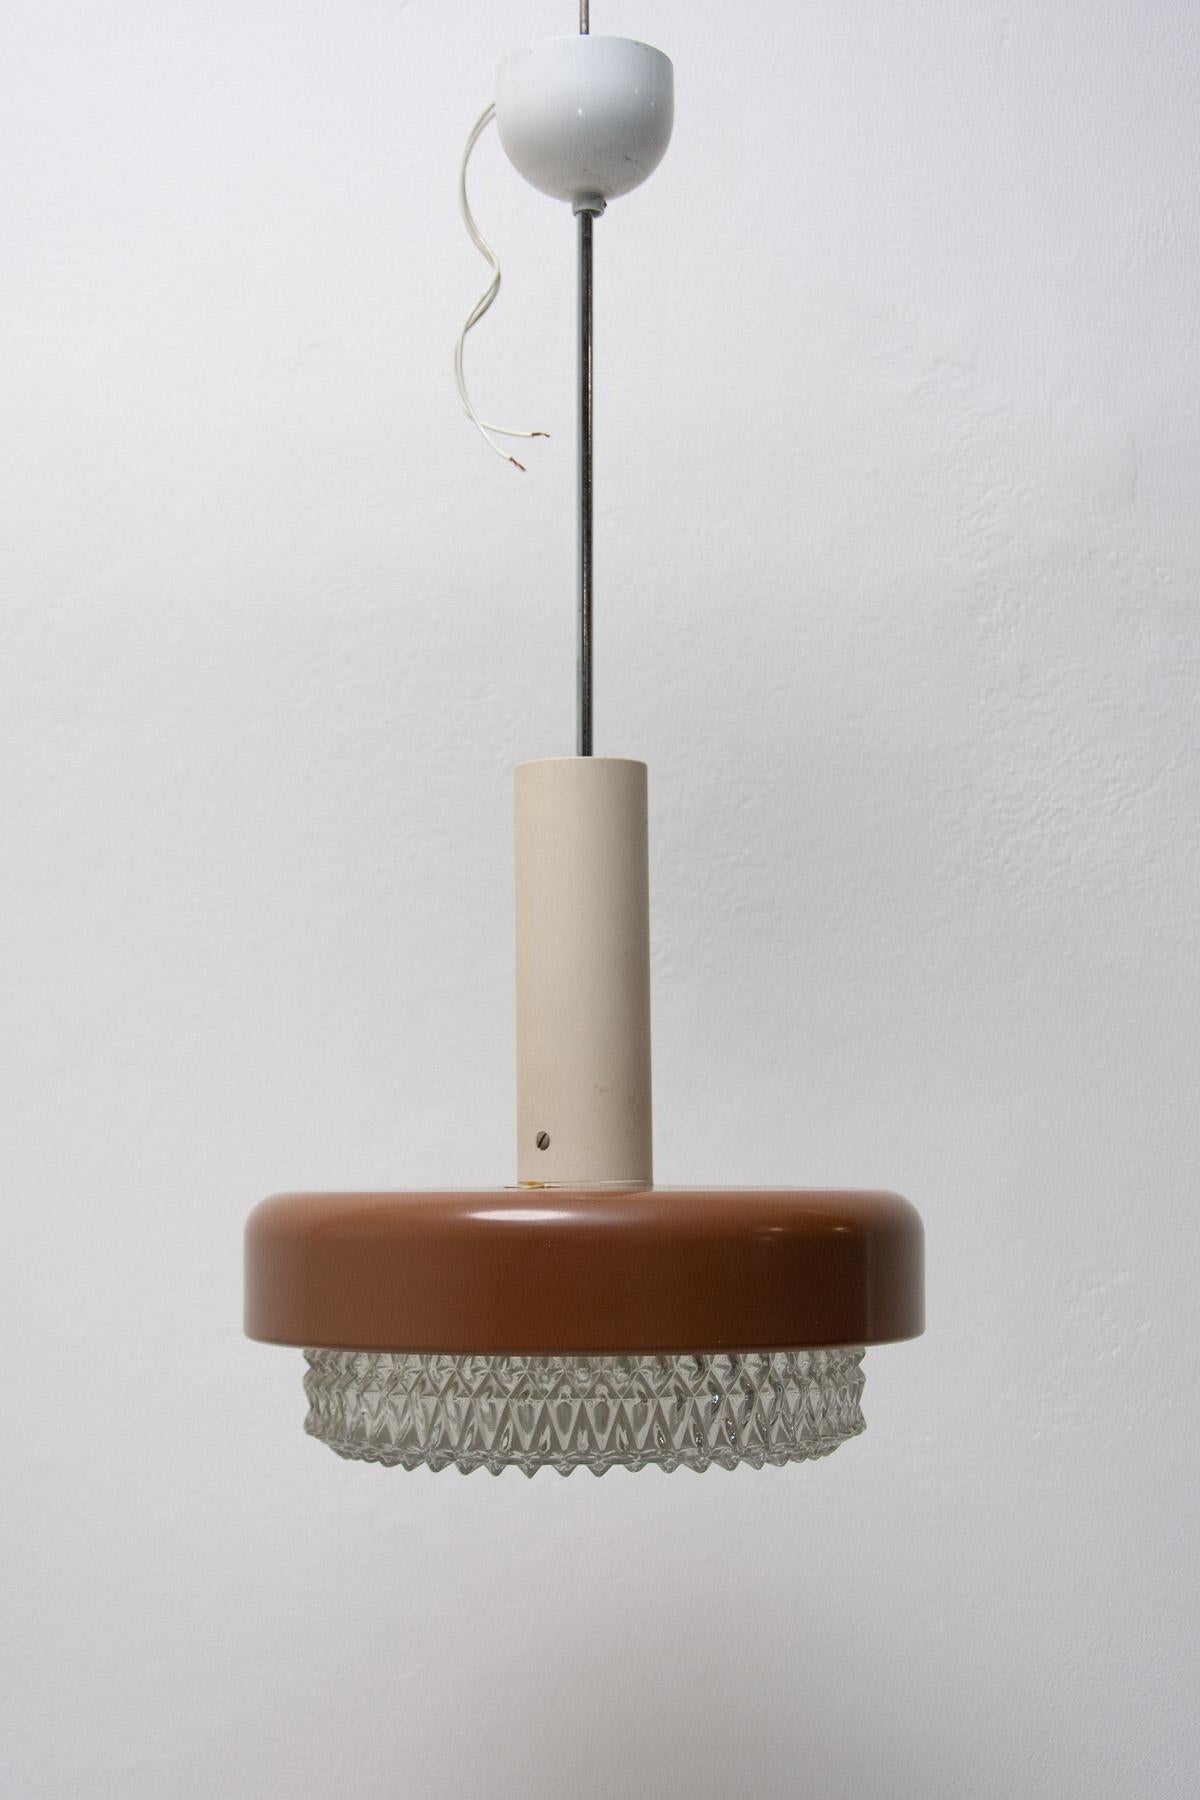 This mid century hanging lamp was made in the former Czechoslovakia in the 1970´s

It´s made of cut glass, plastic, metal, chrome. Very well preserved condition.

Fully functional. New wiring

Height with suspension: 63 cm

width: 39 cm

depth: 29